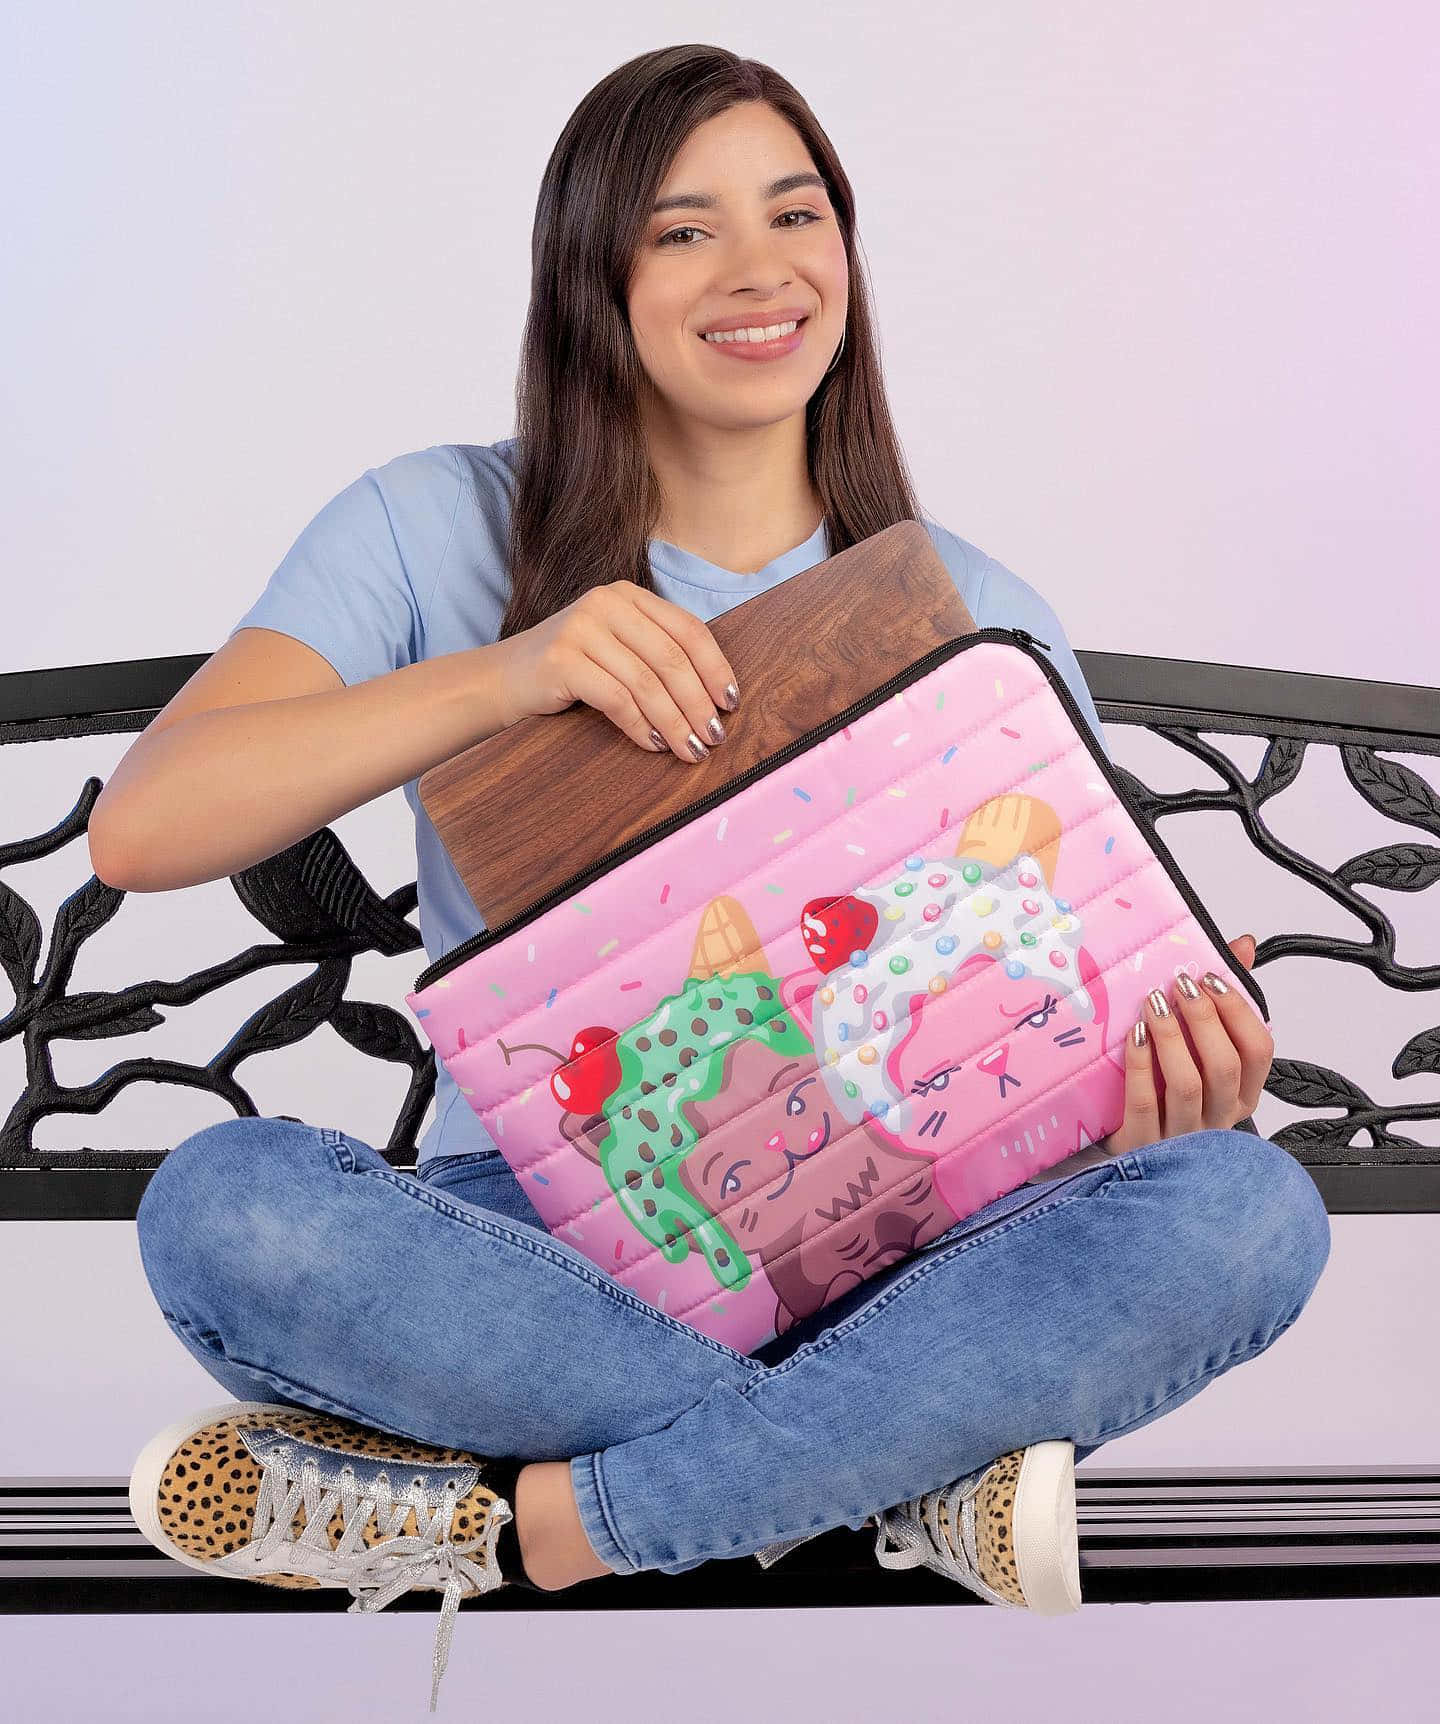 Moriah Elizabeth, whimsical artist and YouTube content creator Wallpaper